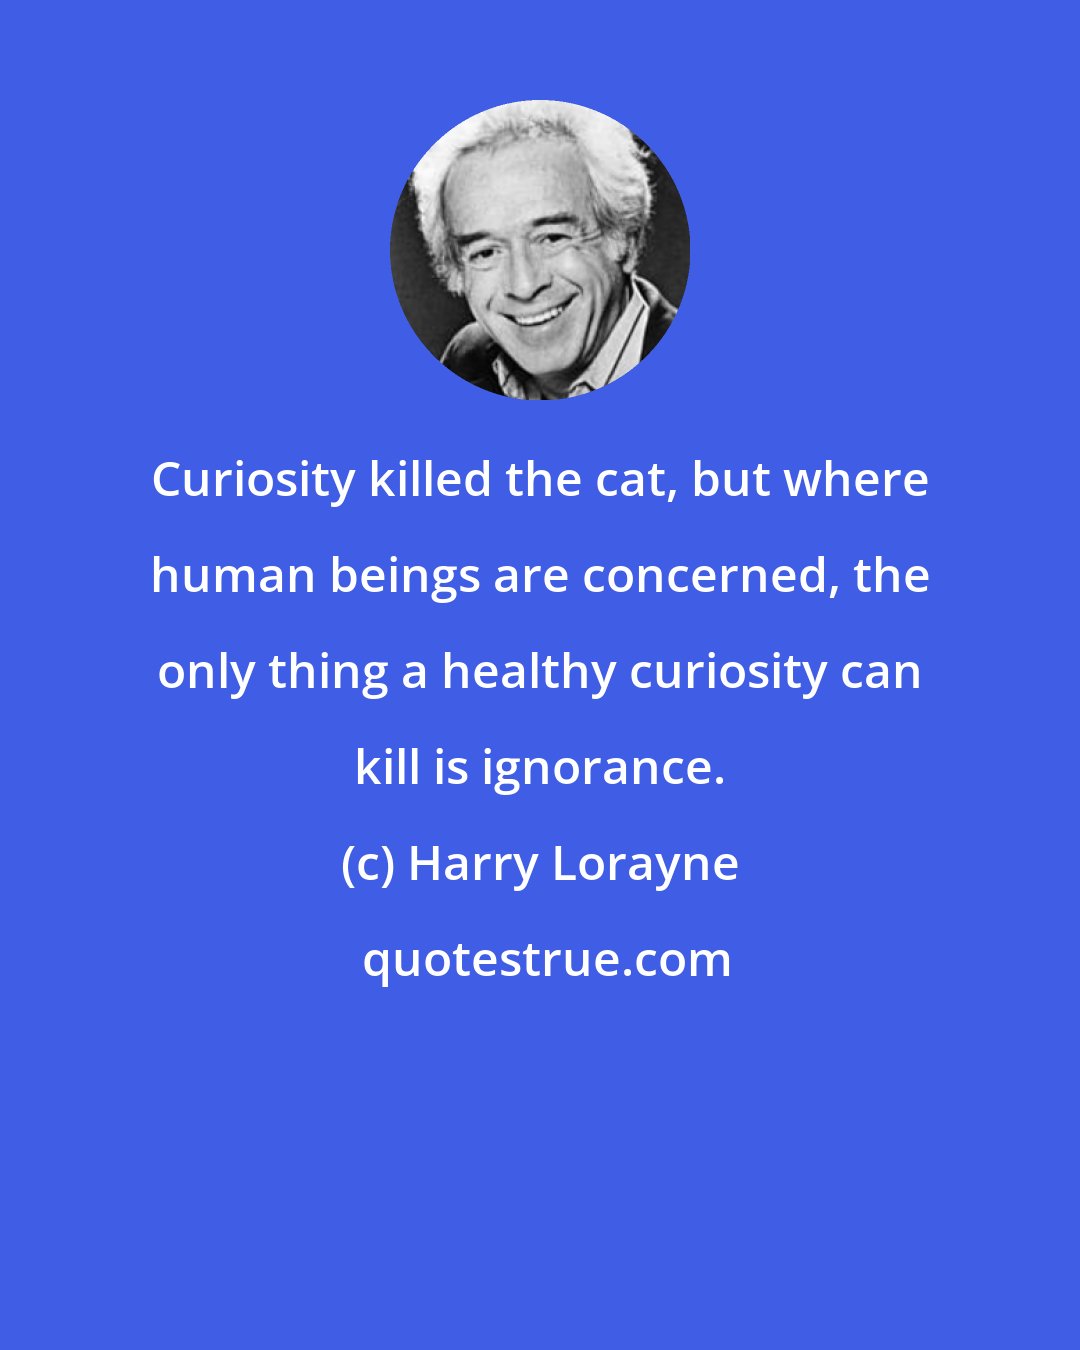 Harry Lorayne: Curiosity killed the cat, but where human beings are concerned, the only thing a healthy curiosity can kill is ignorance.